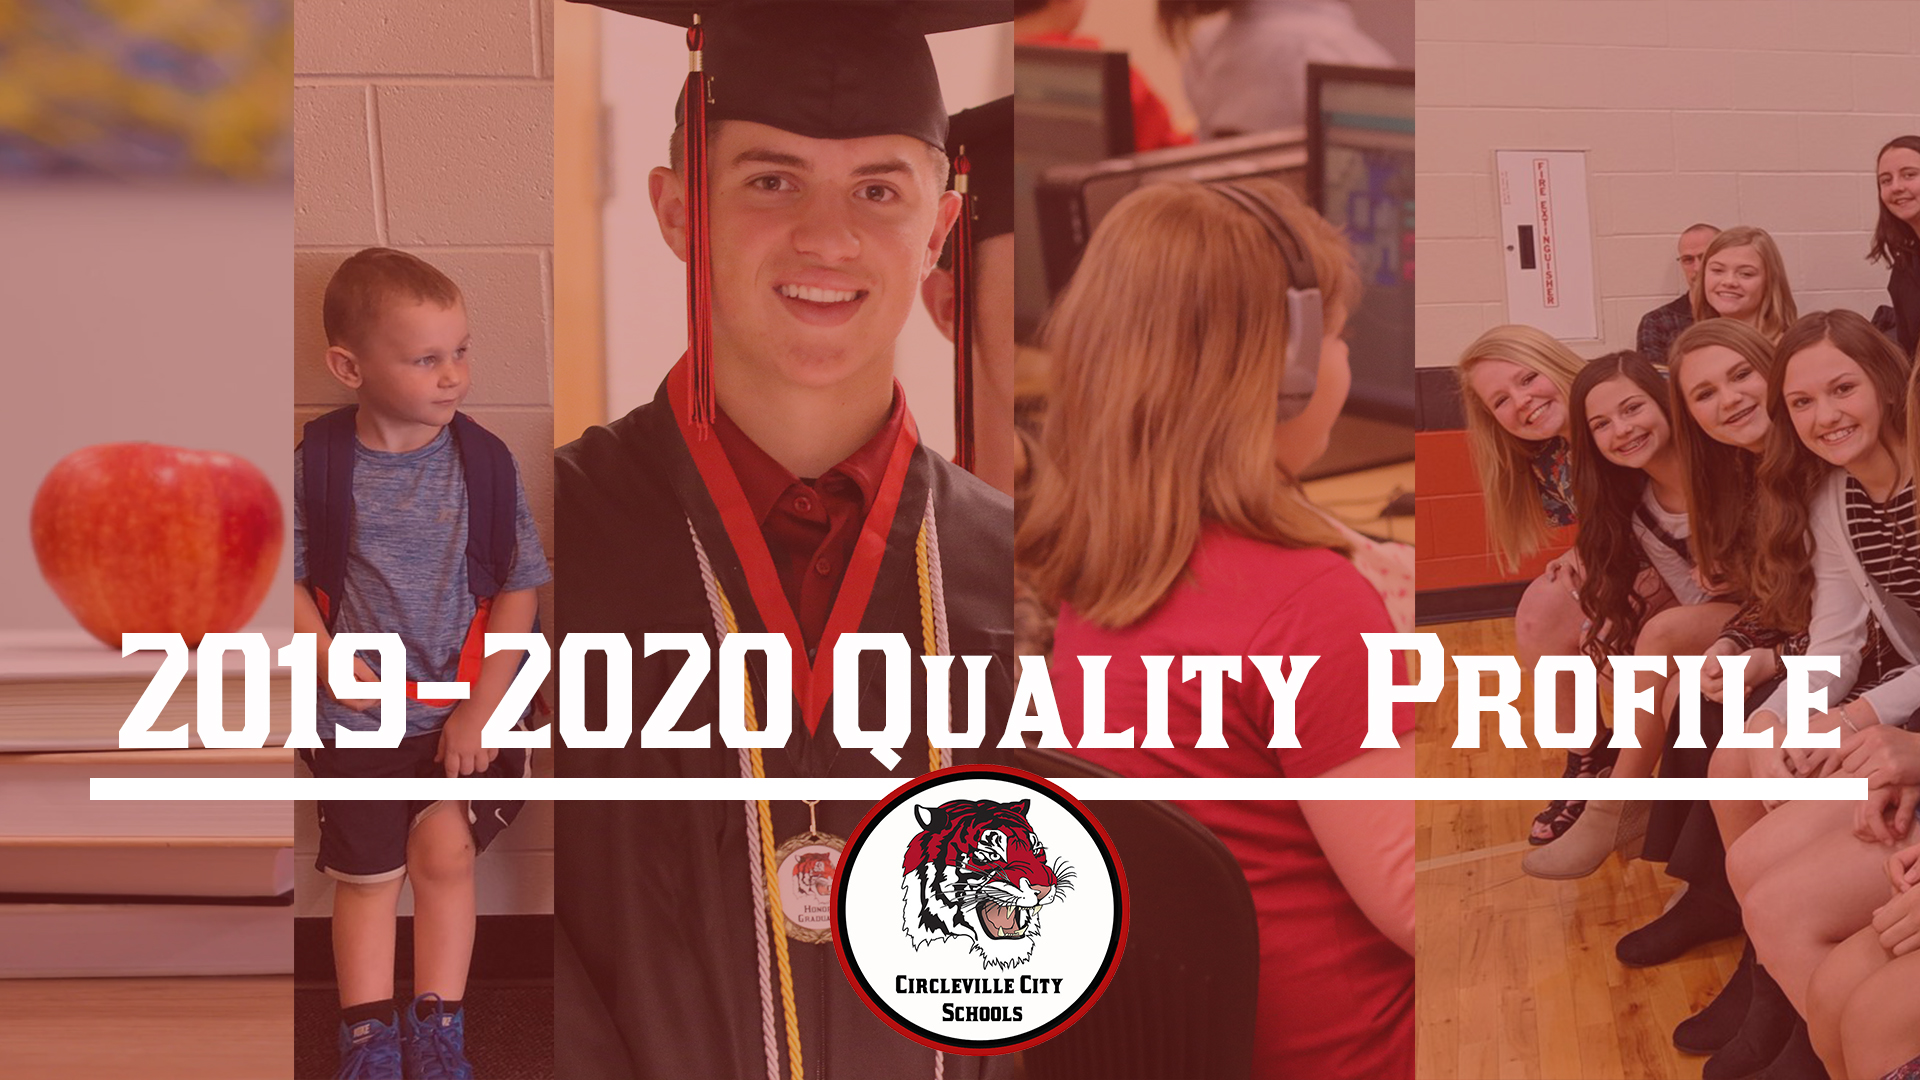 2019-2020 quality profile released